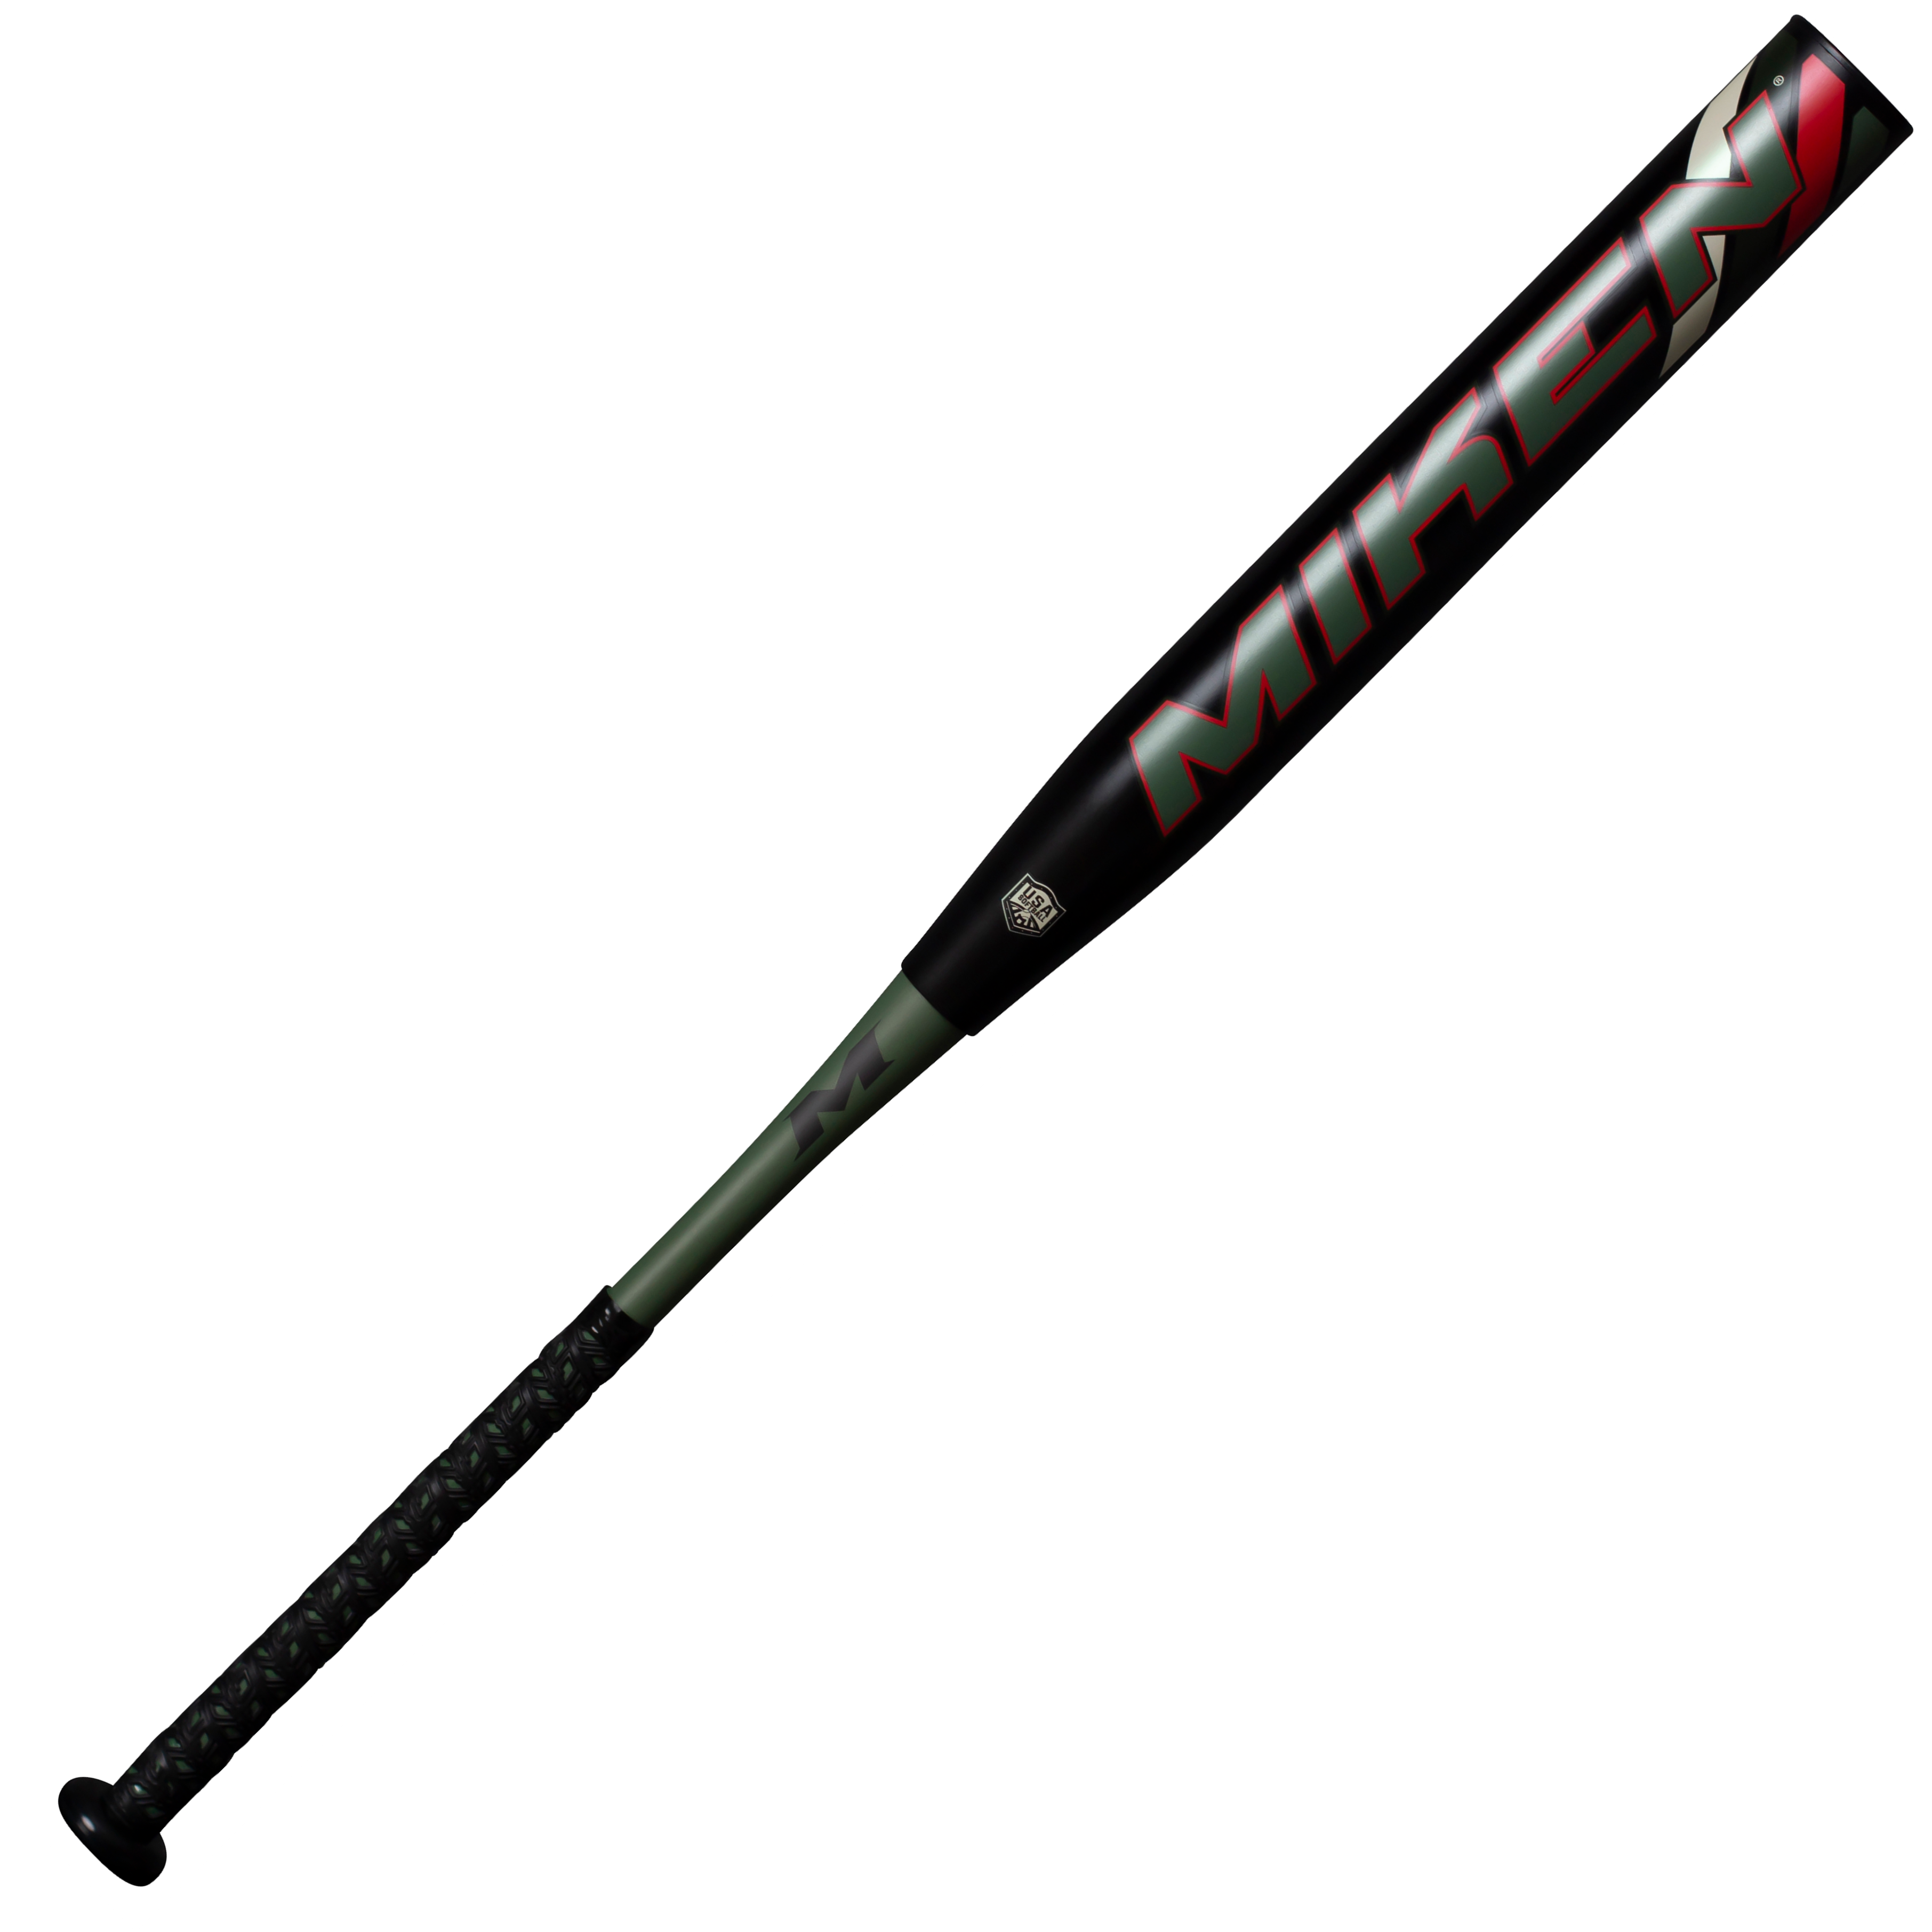 miken-dc-41-supermax-asa-14-inch-slowpitch-softball-bat-34-inch-27-oz MDC20A-3-27 Miken  The ASA 2020 Limited Edition Miken DC-41 Slow Pitch Softball Bat